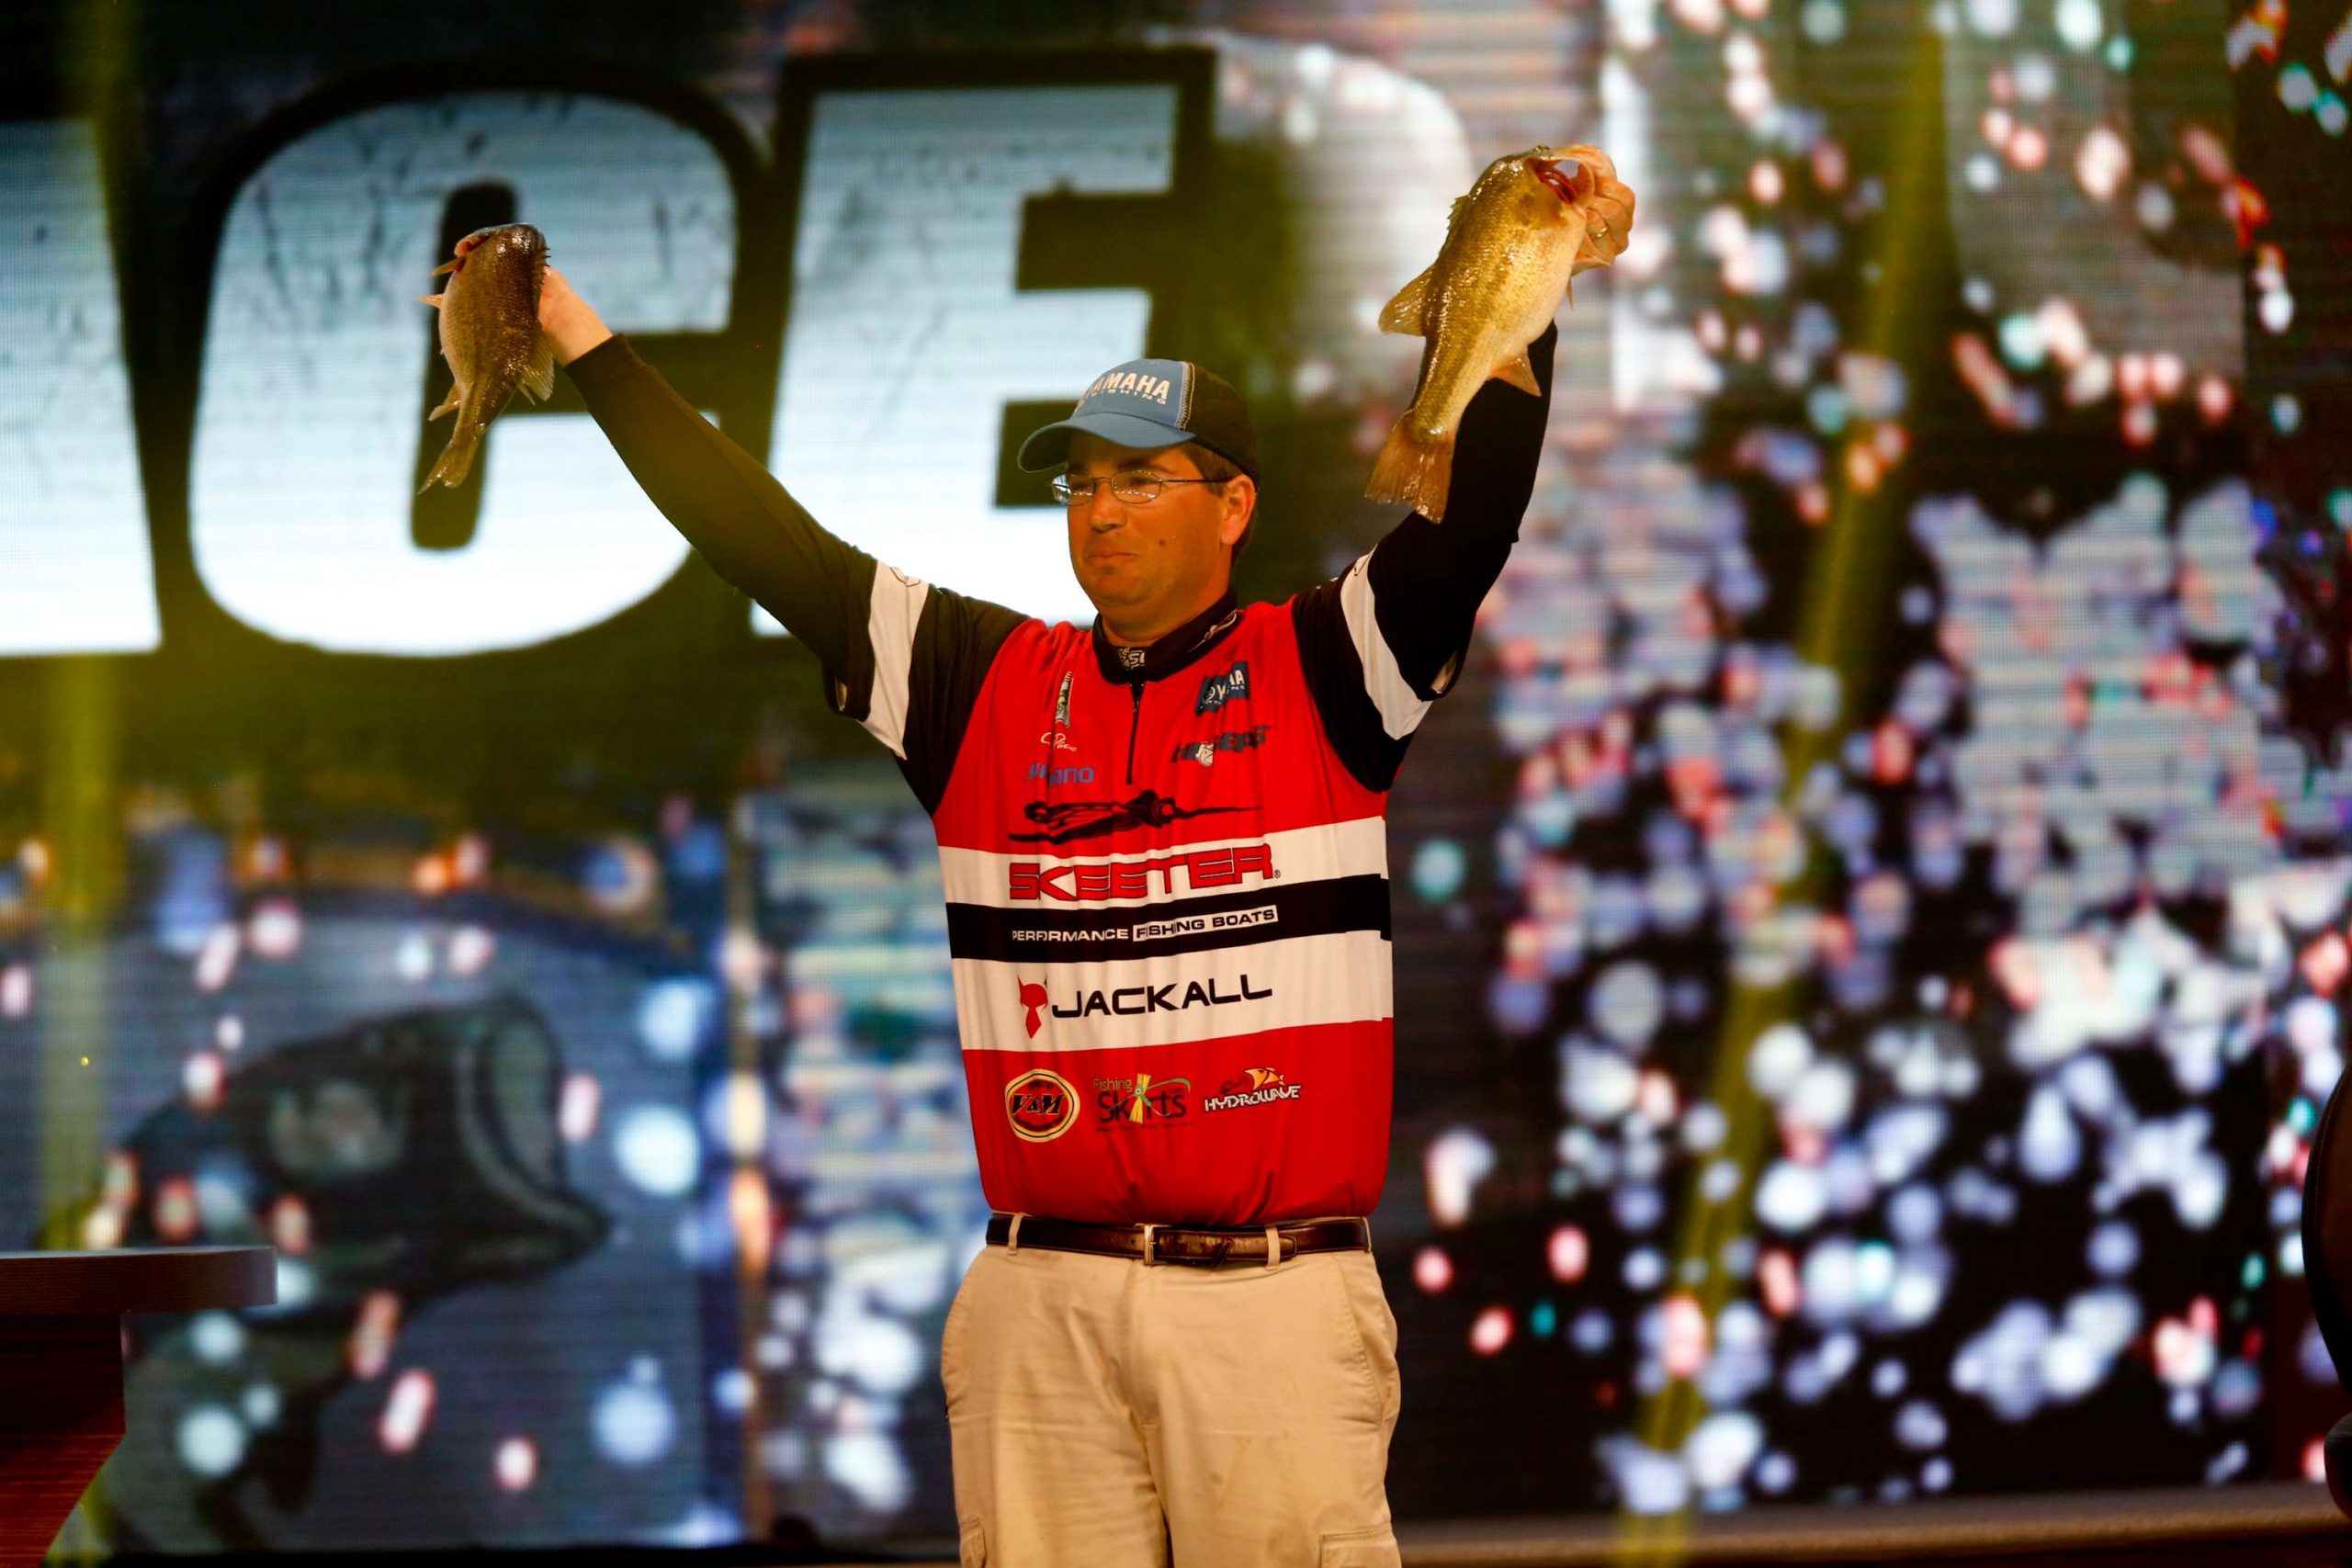 <B>Cliff Pace - 10:1</b>
The 2013 Classic champ is back after a hunting injury (he broke his leg in a tree stand incident) prevented him from defending his title last year on Guntersville. If I had to put my own money on one angler to win the Classic, I'd probably put it on Pace. He finished second to Alton Jones at the 2008 championship on Hartwell and will be revved up and ready to go after sitting out the 2014 Elite season. He's also one of the best in the business with a jig. Pace is on top of his game when fishing's tough. He can grind it out like few others â like he did when he won at Grand Lake. The tougher the fishing at Hartwell, the better I like his chances. As you read this, Pace is busy hoping for a brutal cold front during Classic week.
